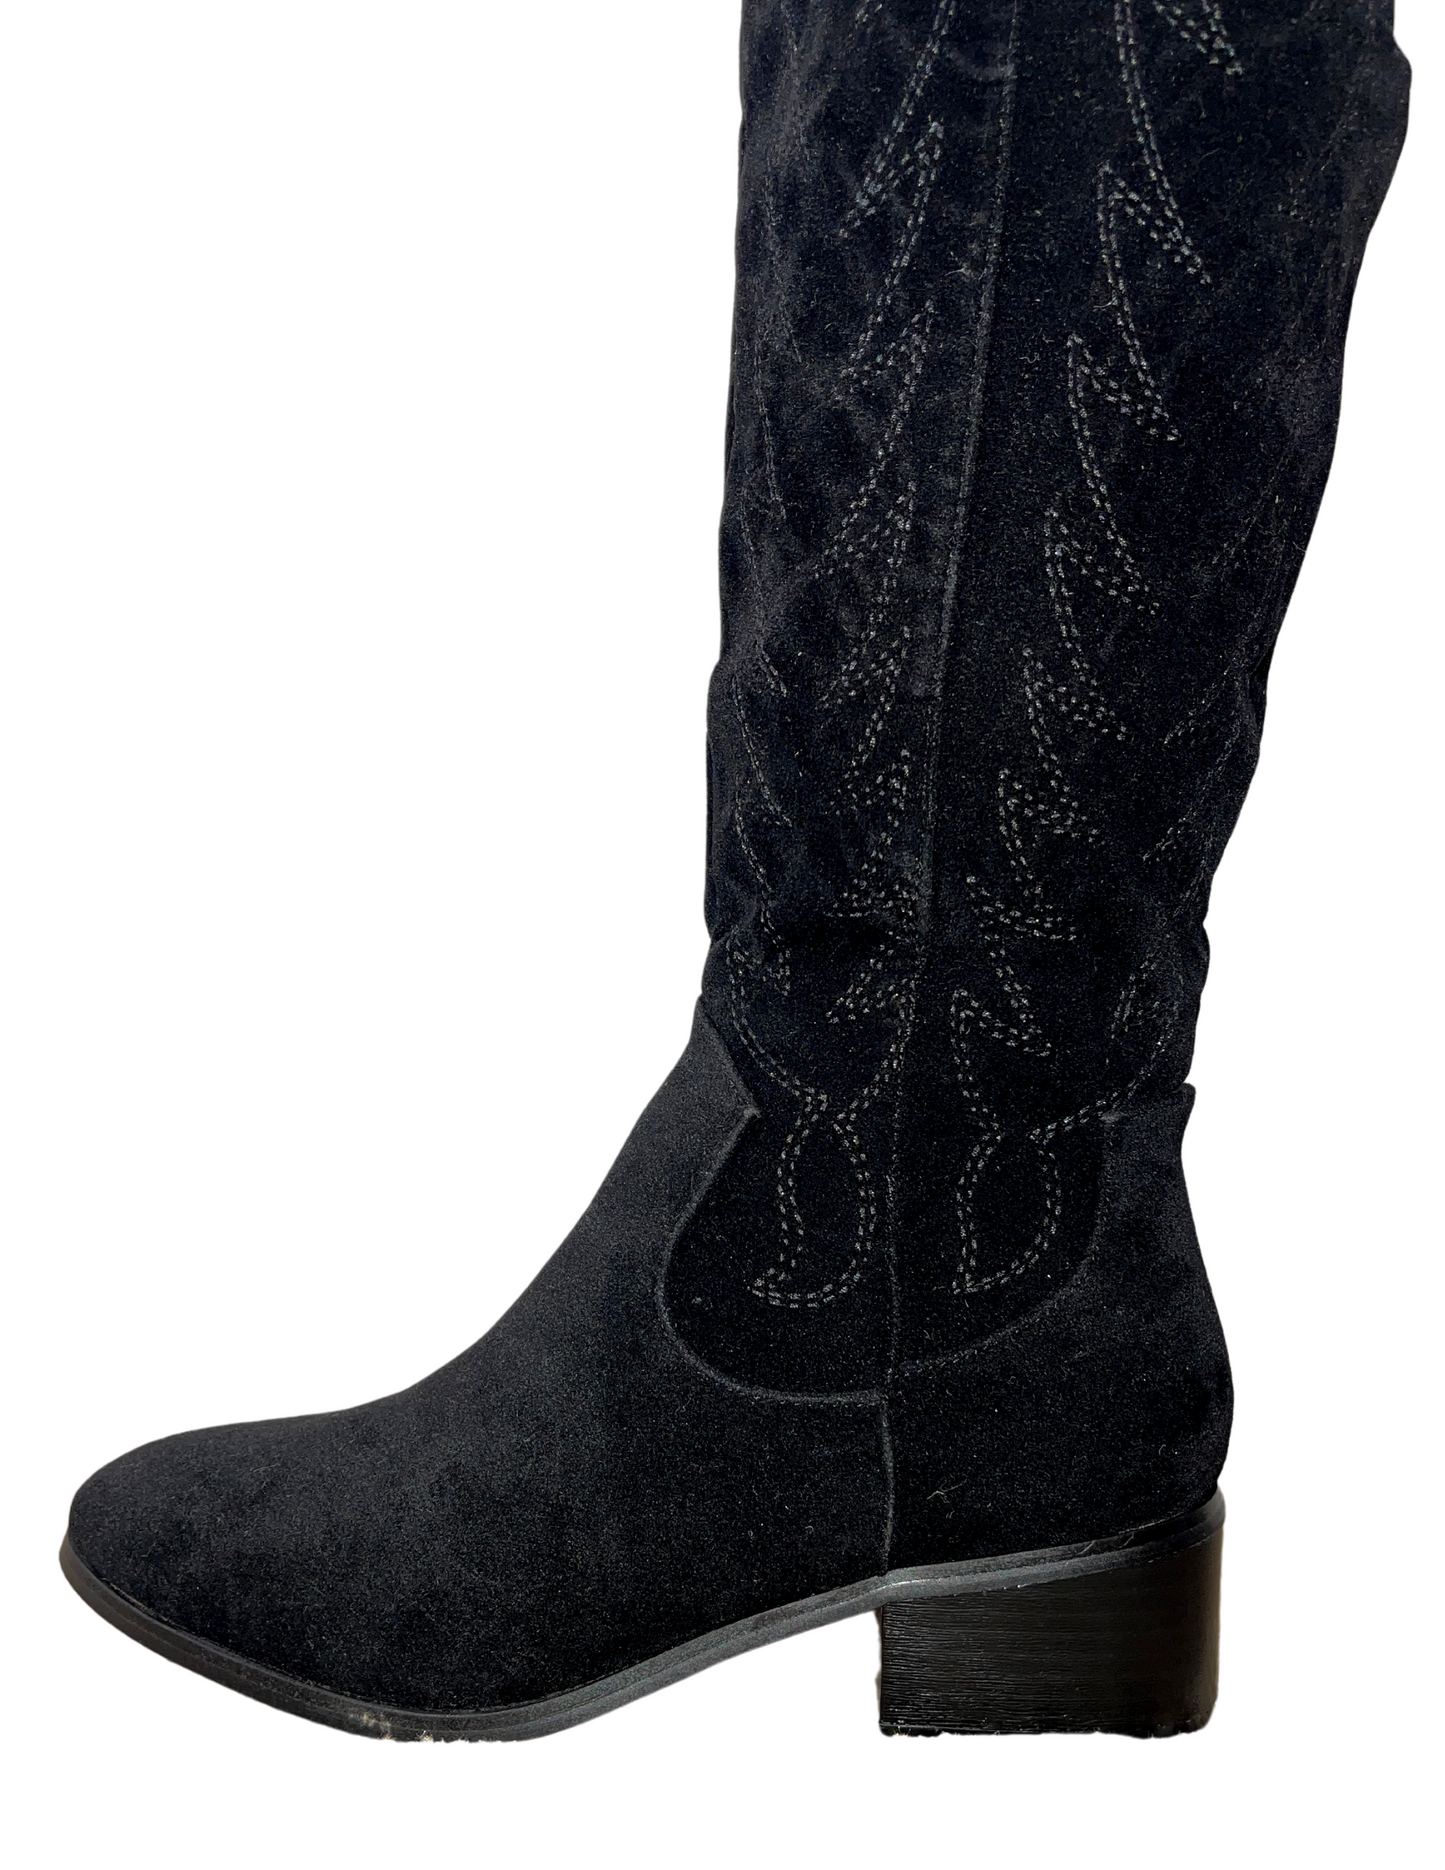 Rustic Glam Thigh High Boots Black